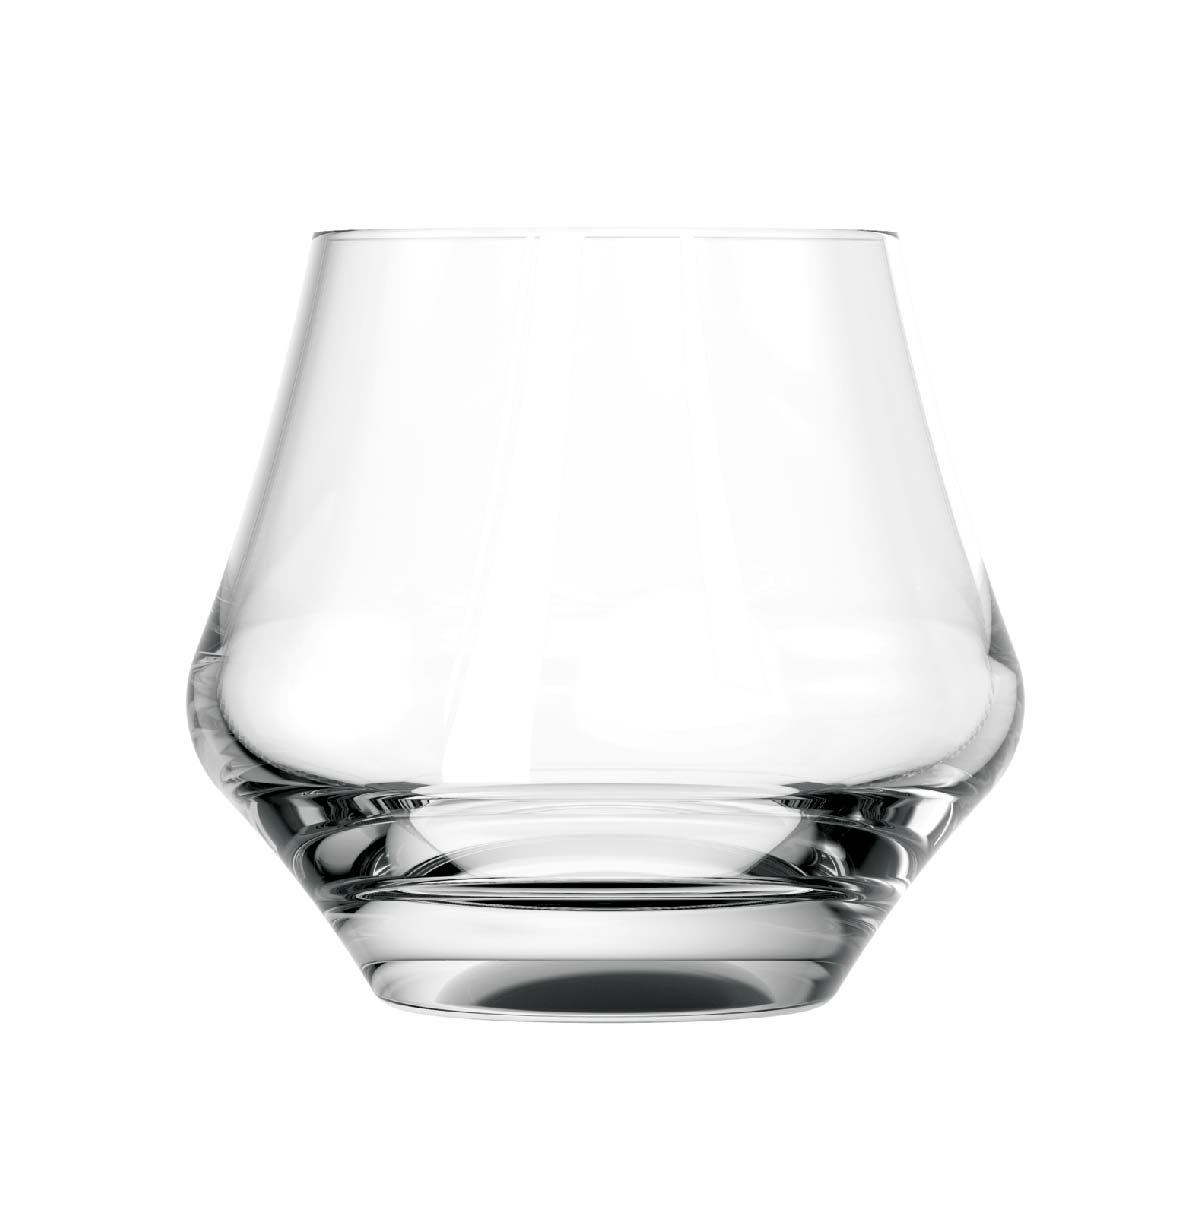 Double Old Fashioned Glas, Onis, Arome - 350ml